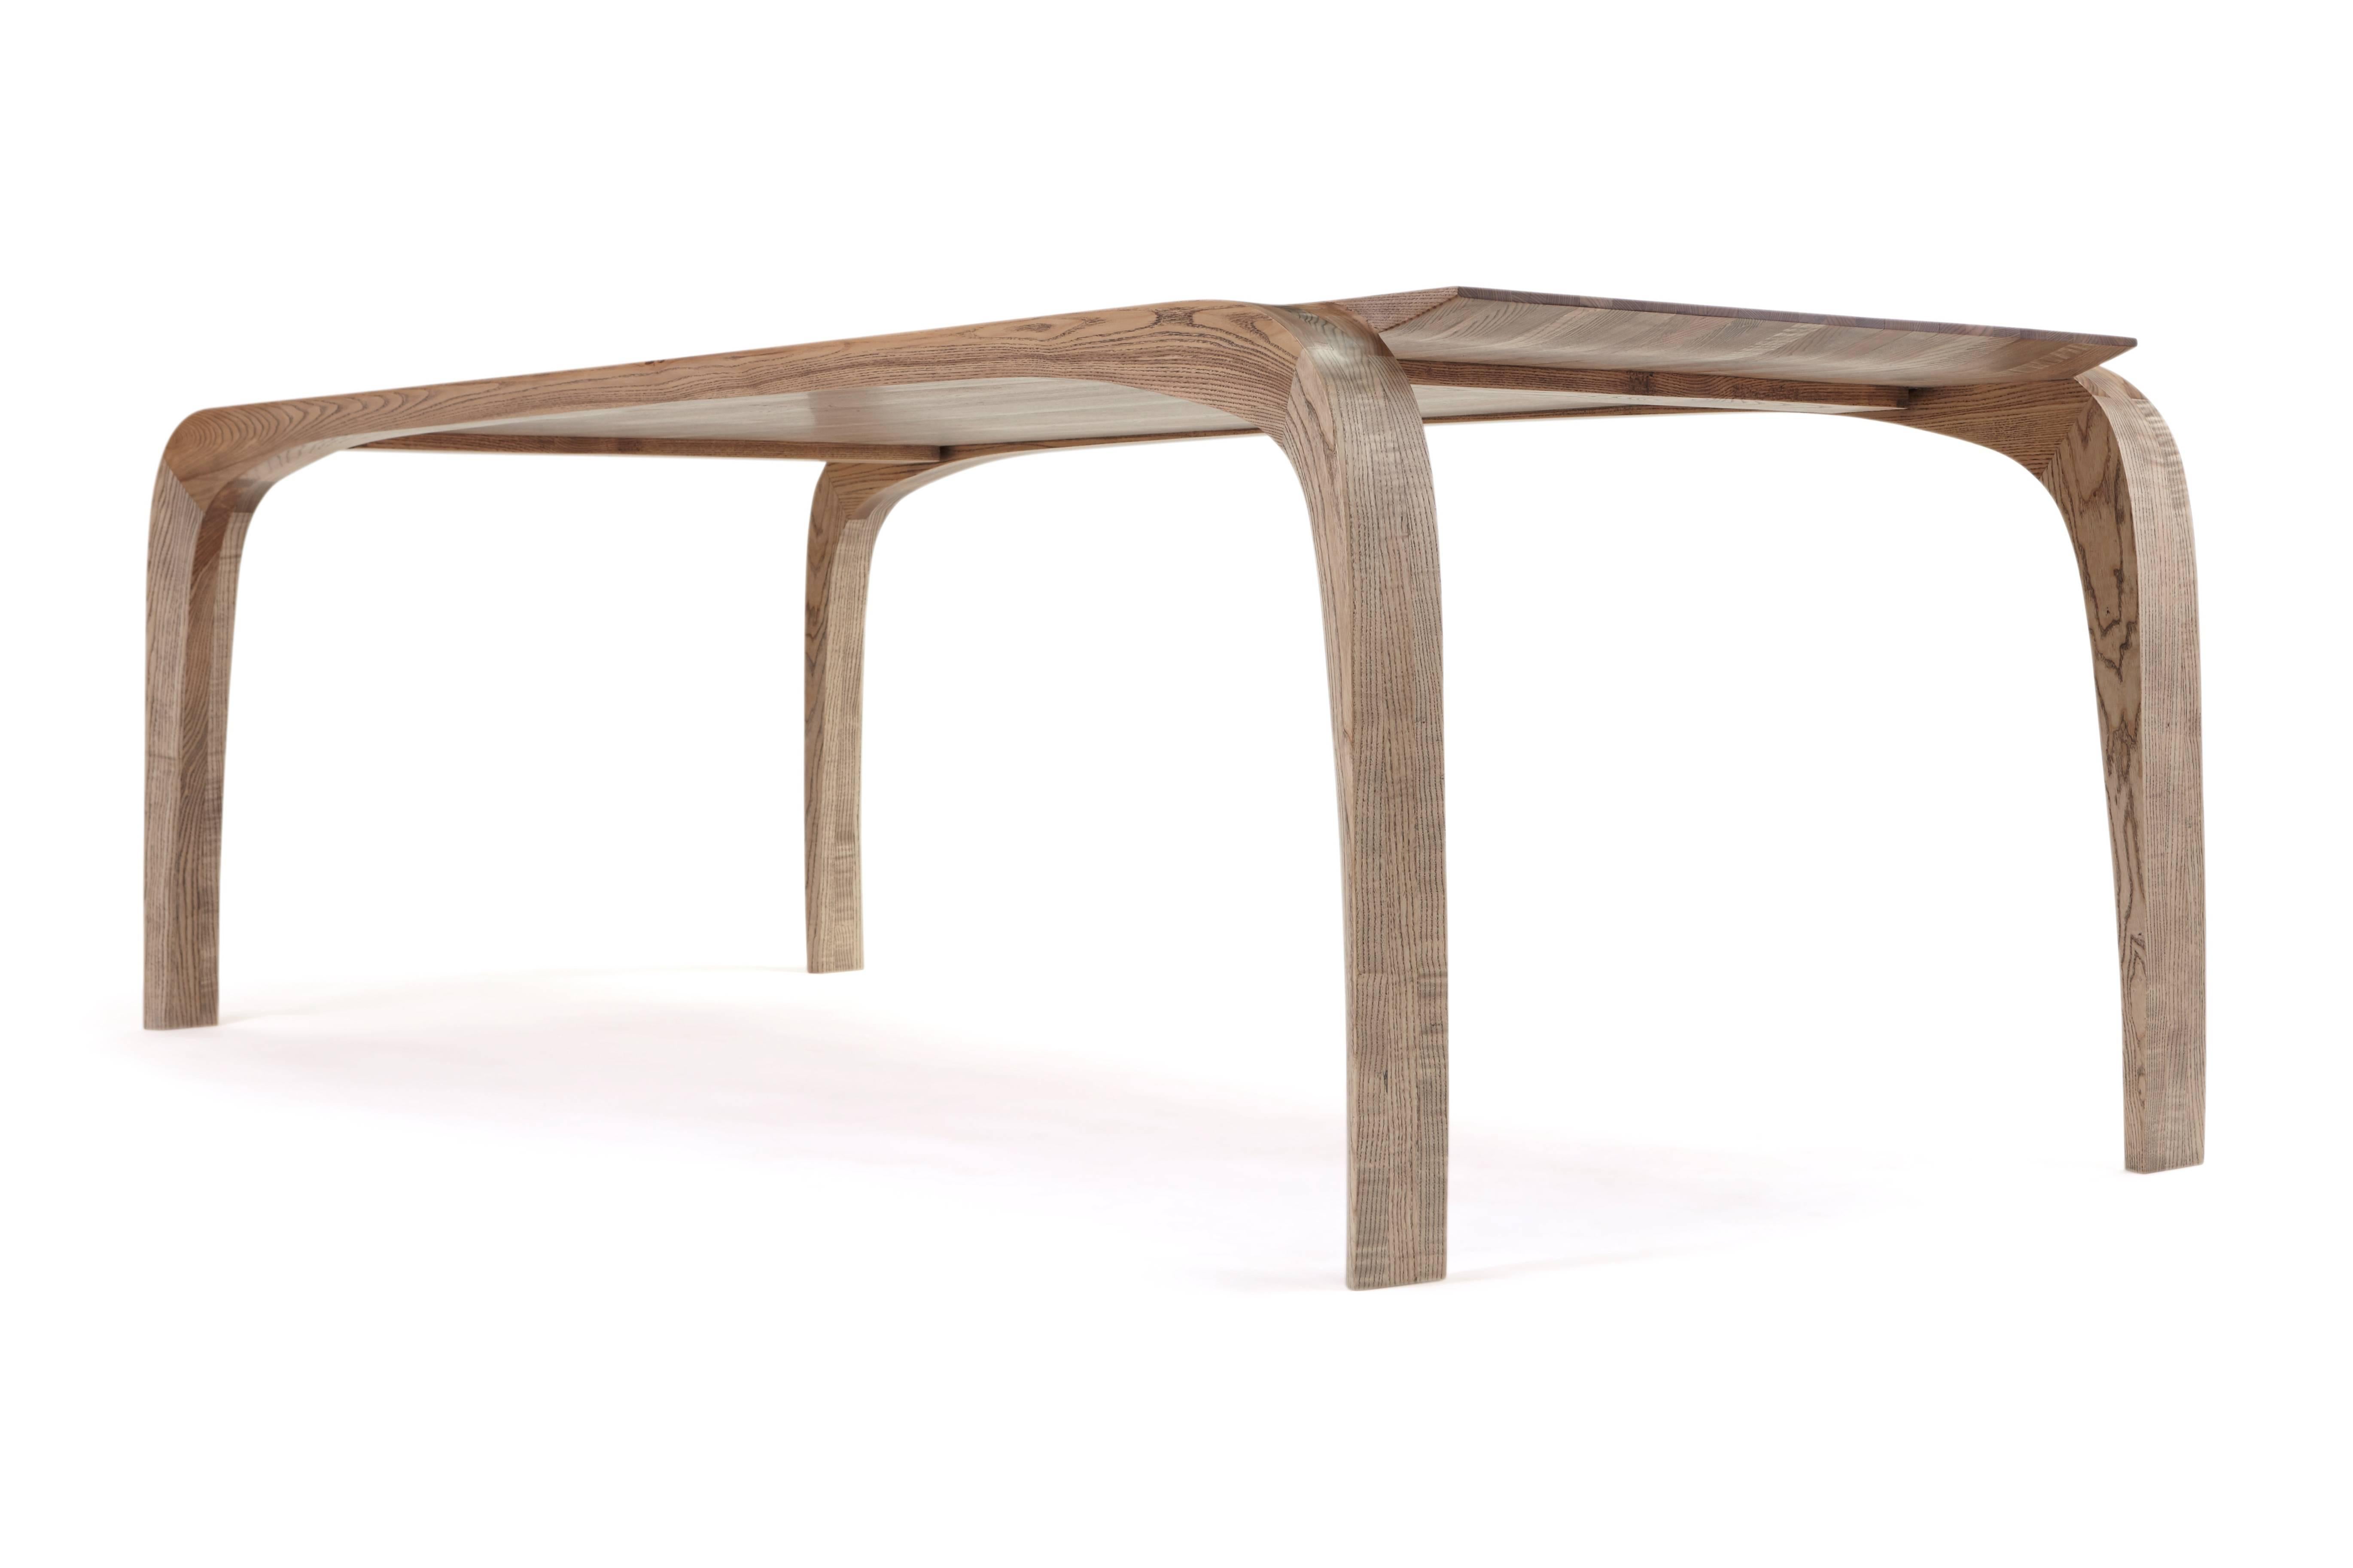 English Contemporary bespoke ash dining table. hand shaped legs by Jonathan Field.